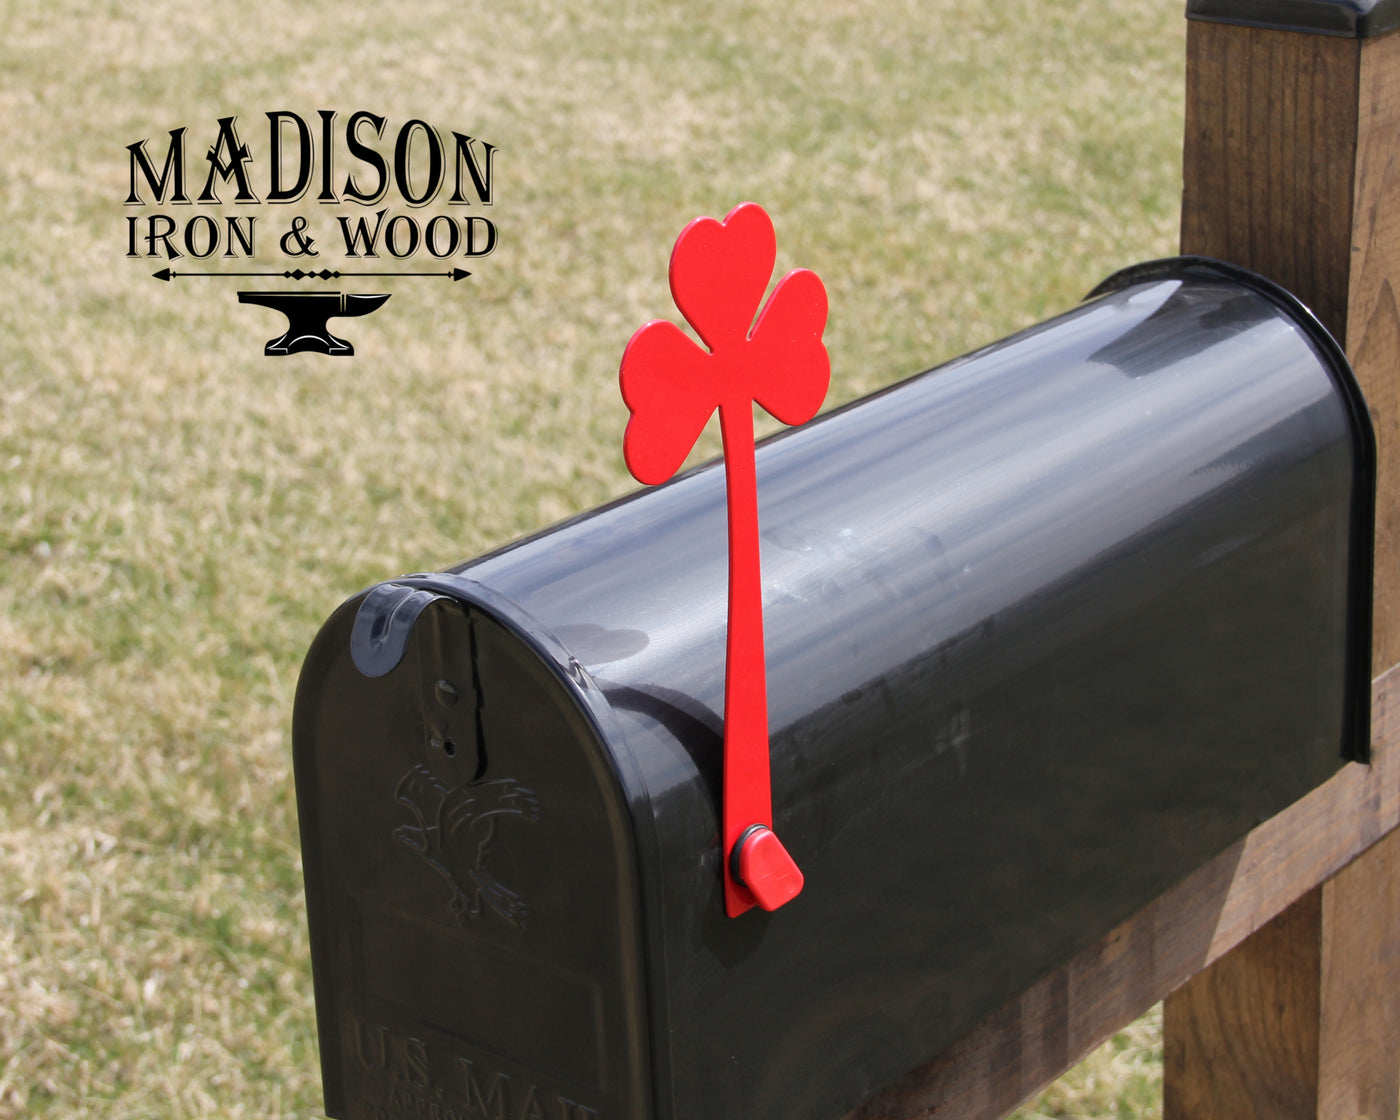 Shamrock Mailbox Flag - Madison Iron and Wood - Mailbox Post Decor - metal outdoor decor - Steel deocrations - american made products - veteran owned business products - fencing decorations - fencing supplies - custom wall decorations - personalized wall signs - steel - decorative post caps - steel post caps - metal post caps - brackets - structural brackets - home improvement - easter - easter decorations - easter gift - easter yard decor